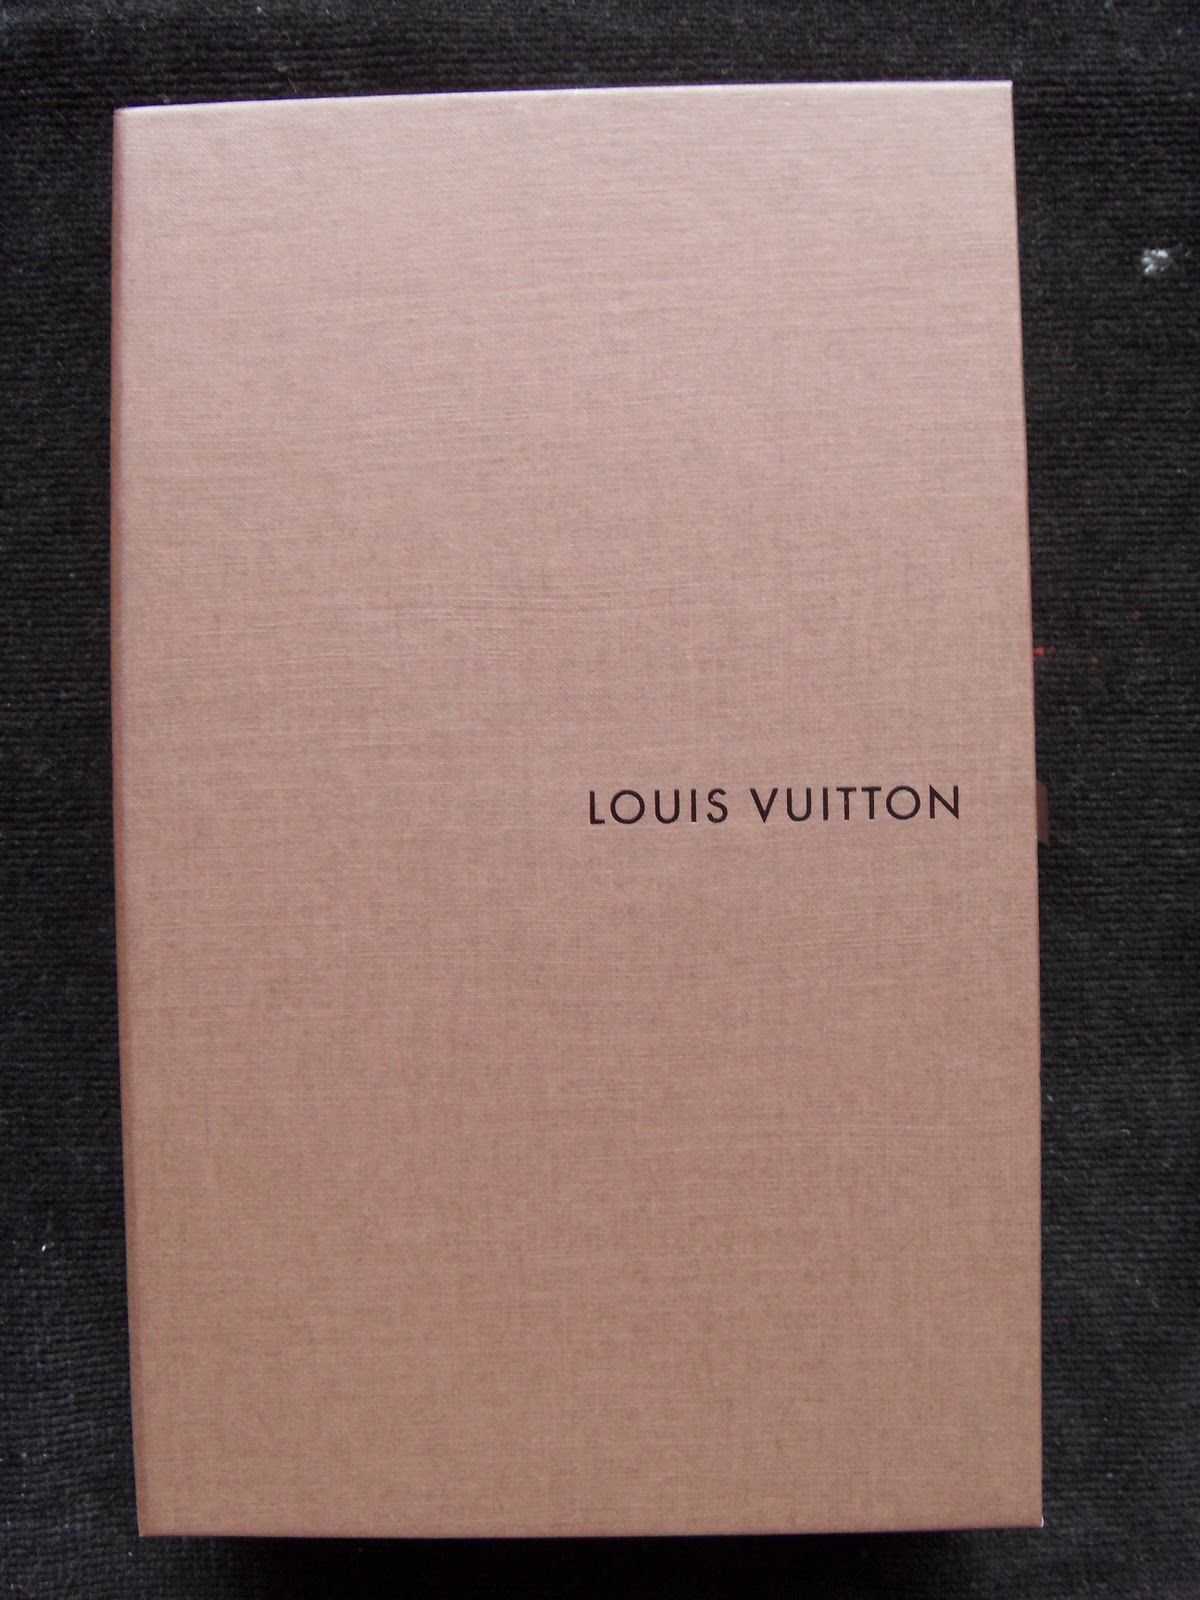 Sell Louis Vuitton Boxes  Natural Resource Department